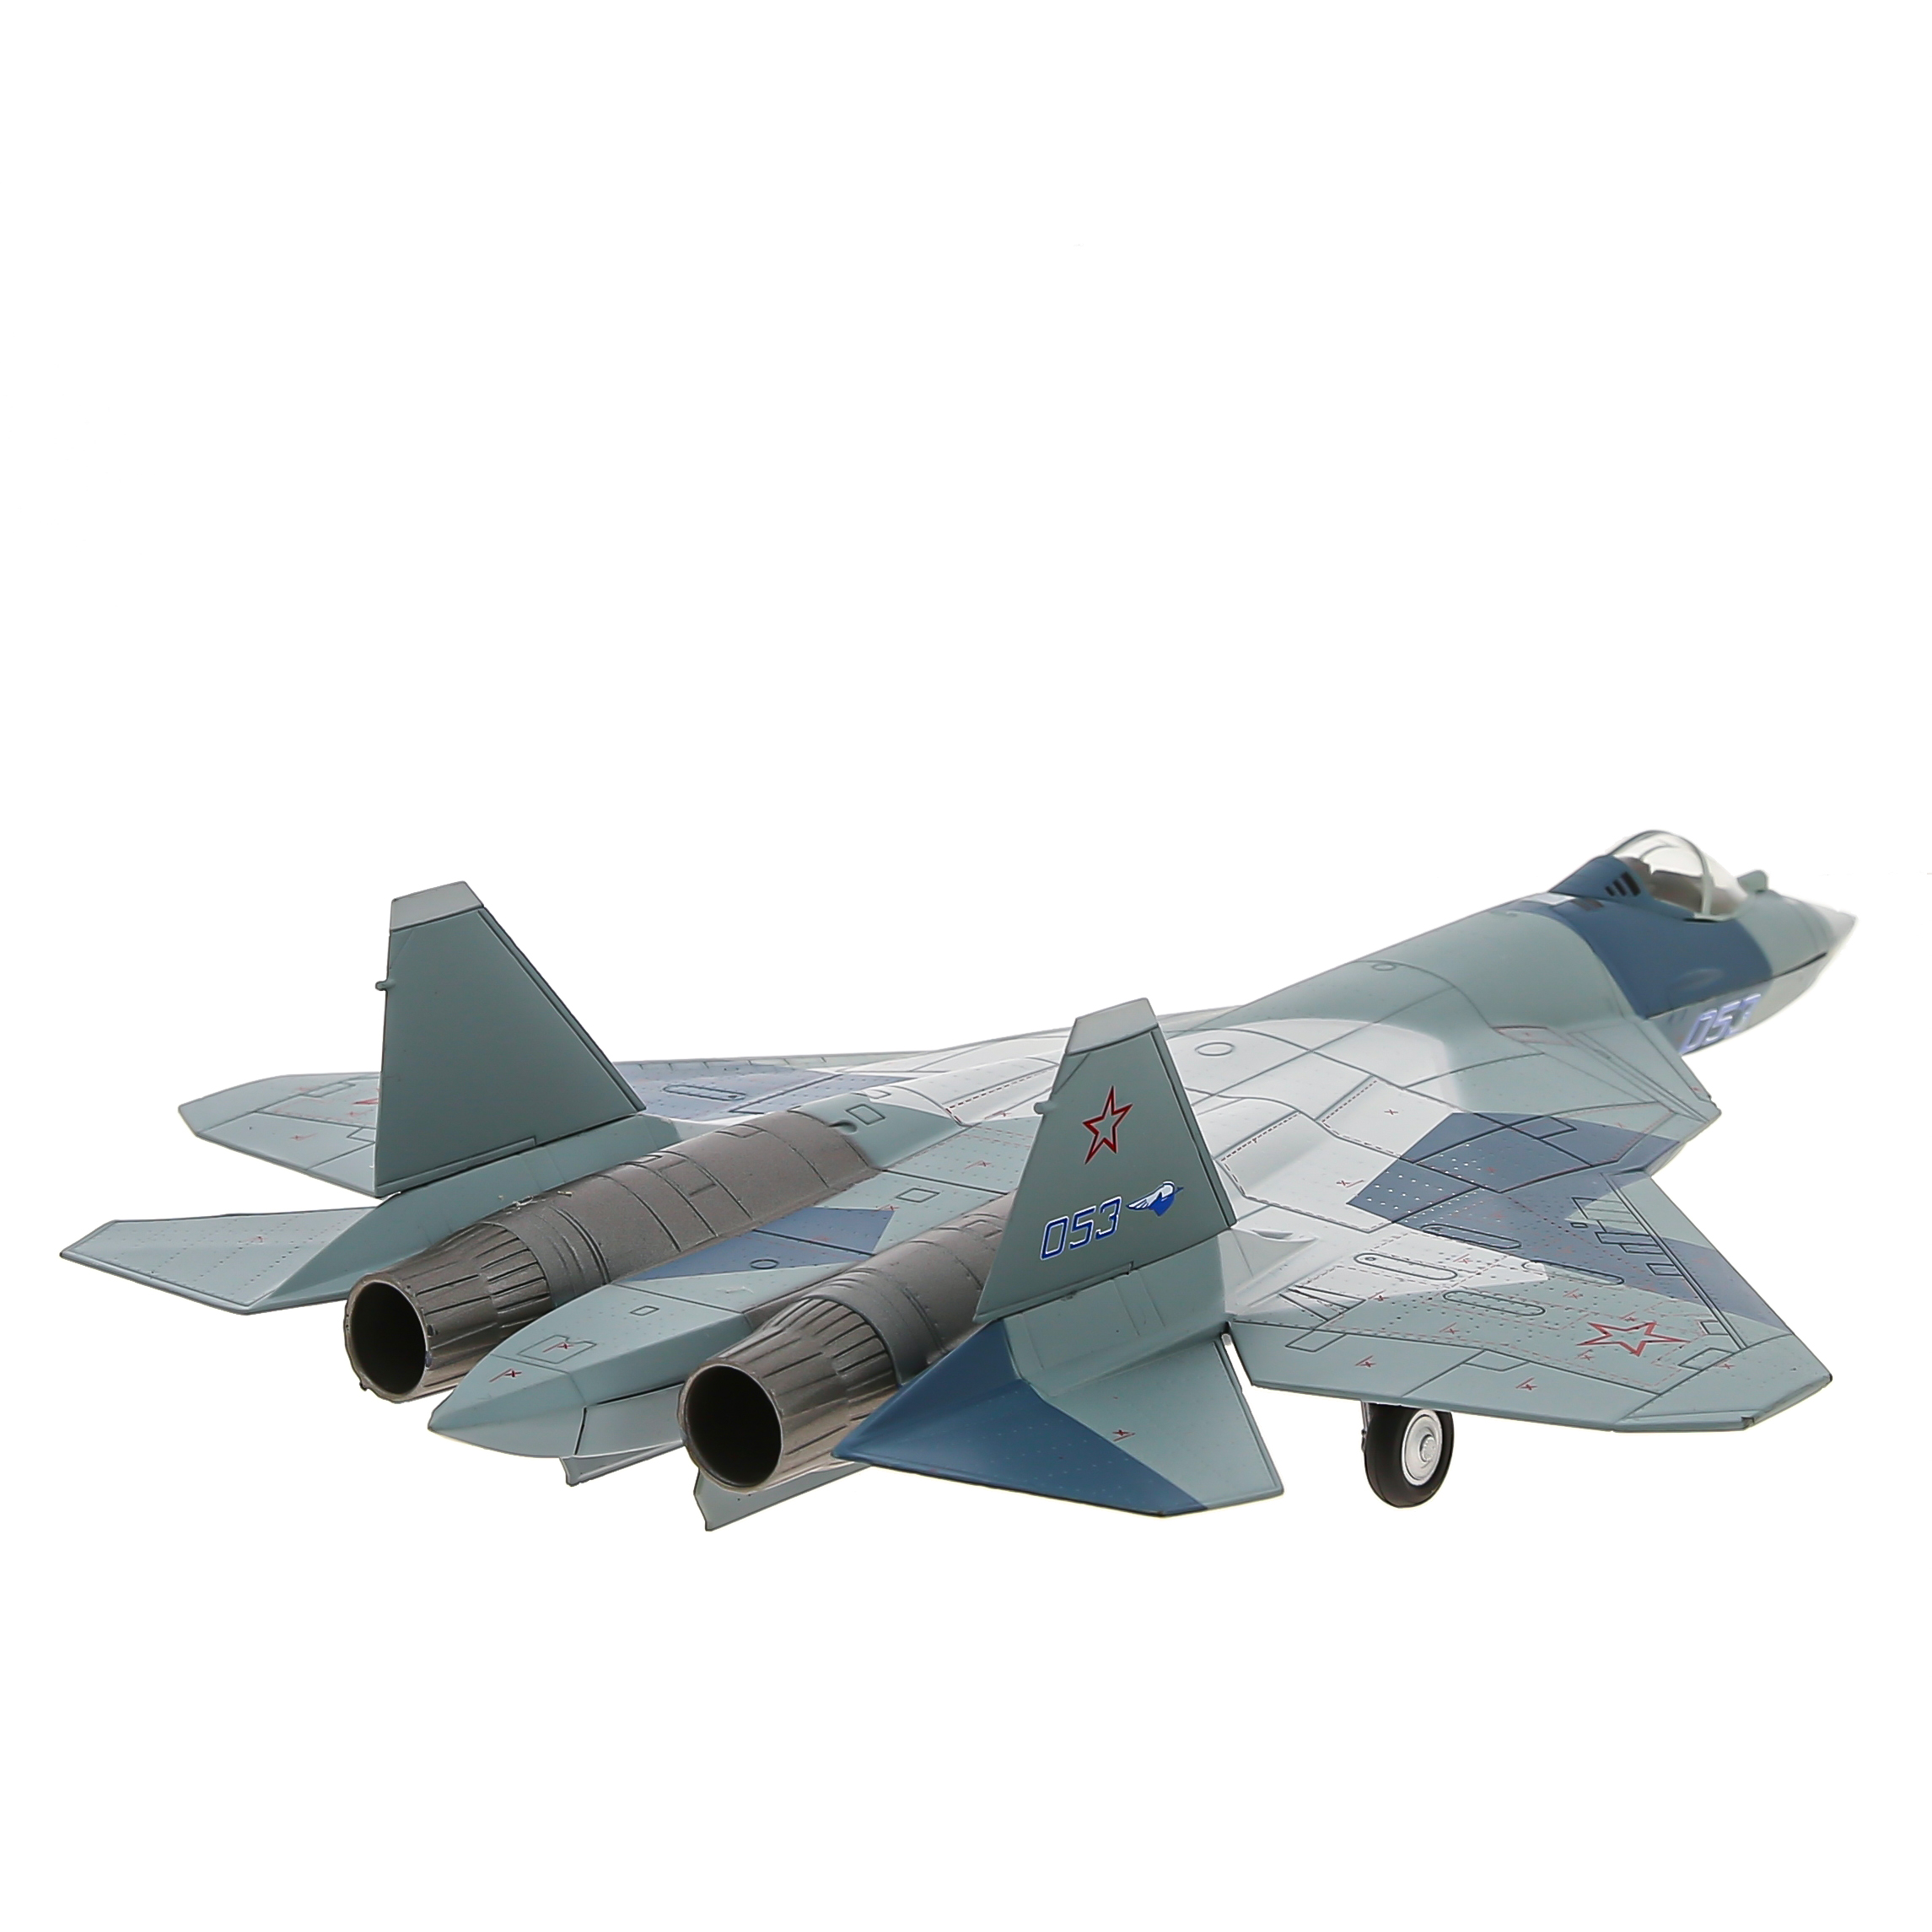       -57 (-50), ,  1:72.  28 . Model of the fifth-generation fighter aircraft of Russia Su-57 (T-50), metal, scale 1:72. Length 28 cm. # 4 hobbyplus.ru